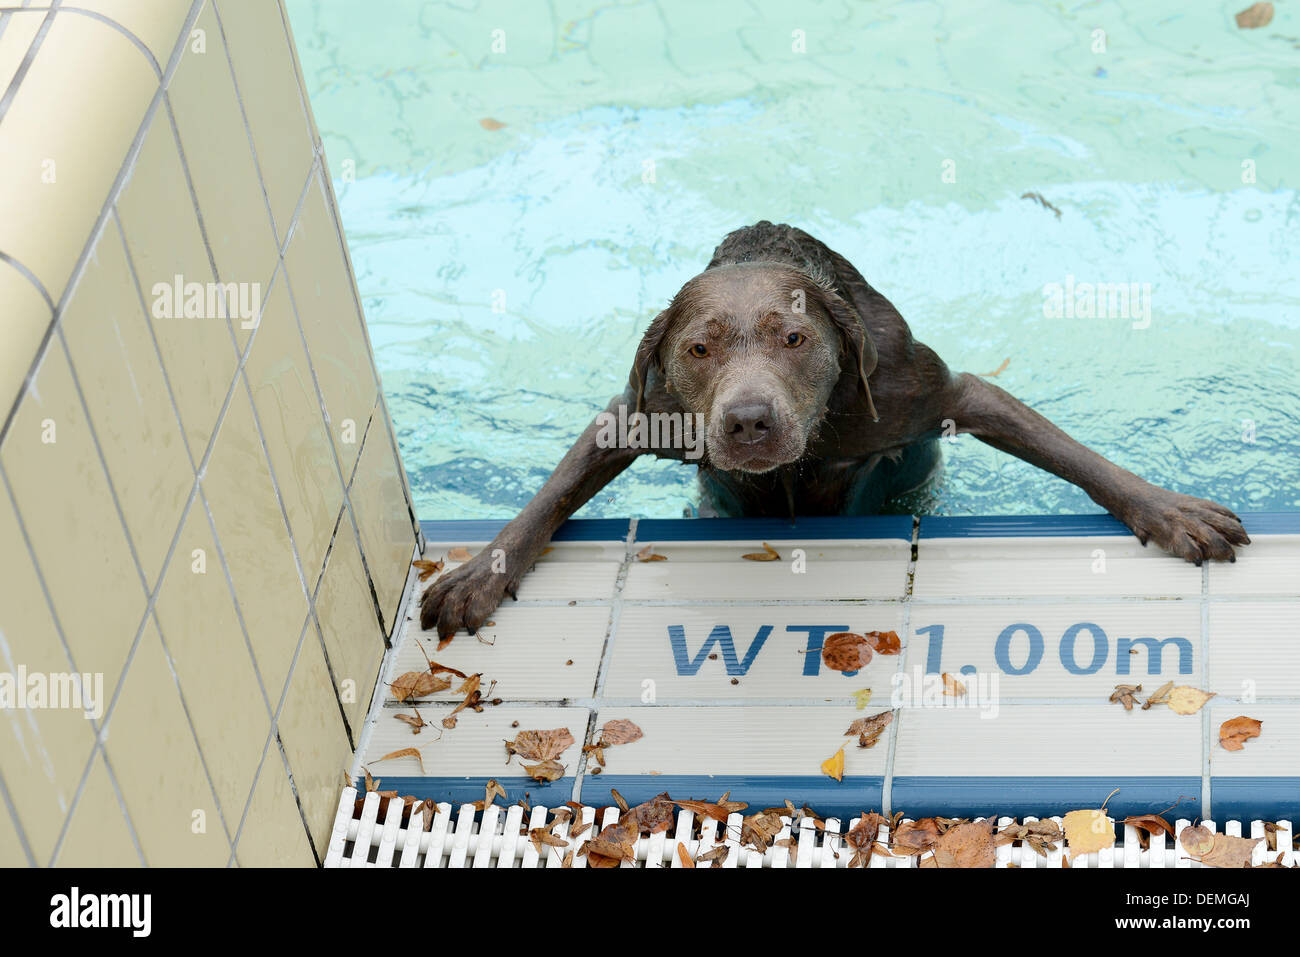 Bamberg, Germany. 21st Sep, 2013. A dog tries to get out of a pool during the Dog Bathing Day at Stadionbad pool in Bamberg, Germany, 21 September 2013. Municipal works opened their pools exclusively for dogs at the end of the outdoor swimming pool season. Photo: DAVID EBENER/dpa/Alamy Live News Stock Photo